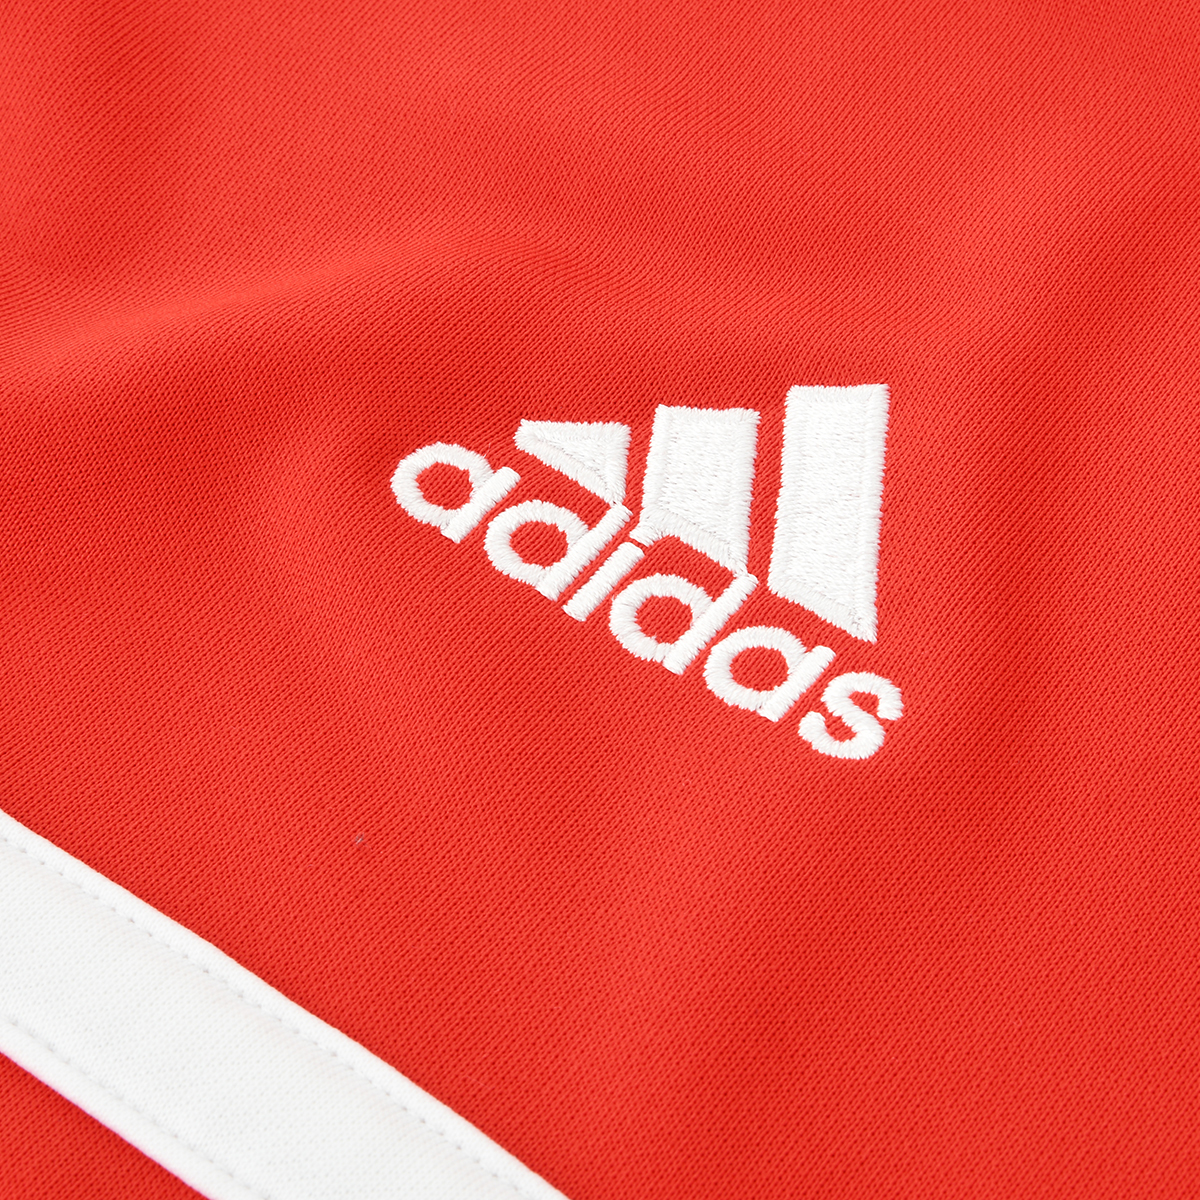 Campera Fútbol adidas River Plate 3 Stripes Hombre,  image number null